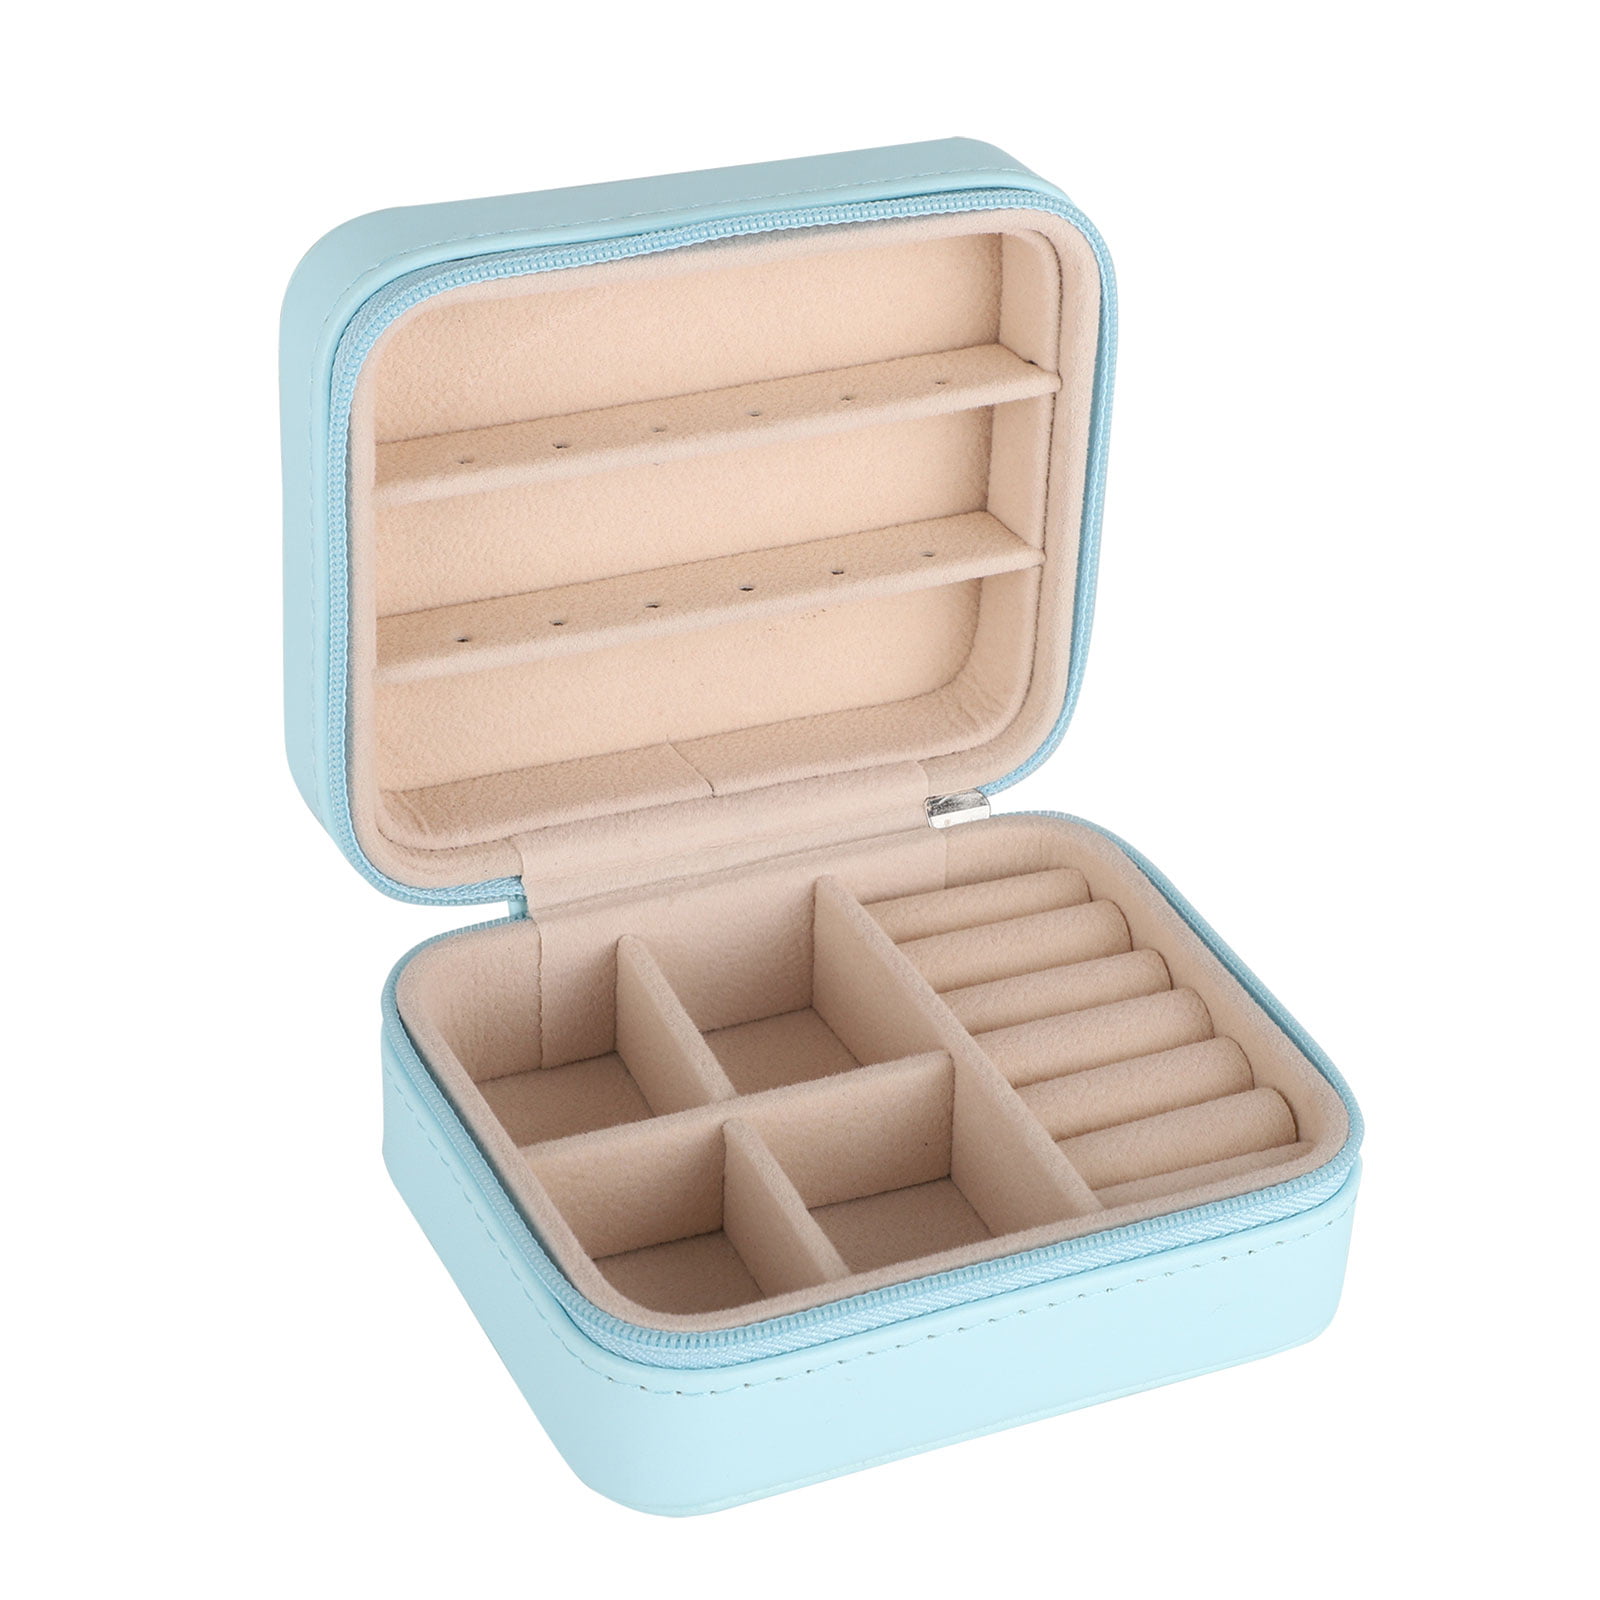 Details about   Duomiila Small Travel Jewelry Box Organizer Display Storage Case for Rings Earri 